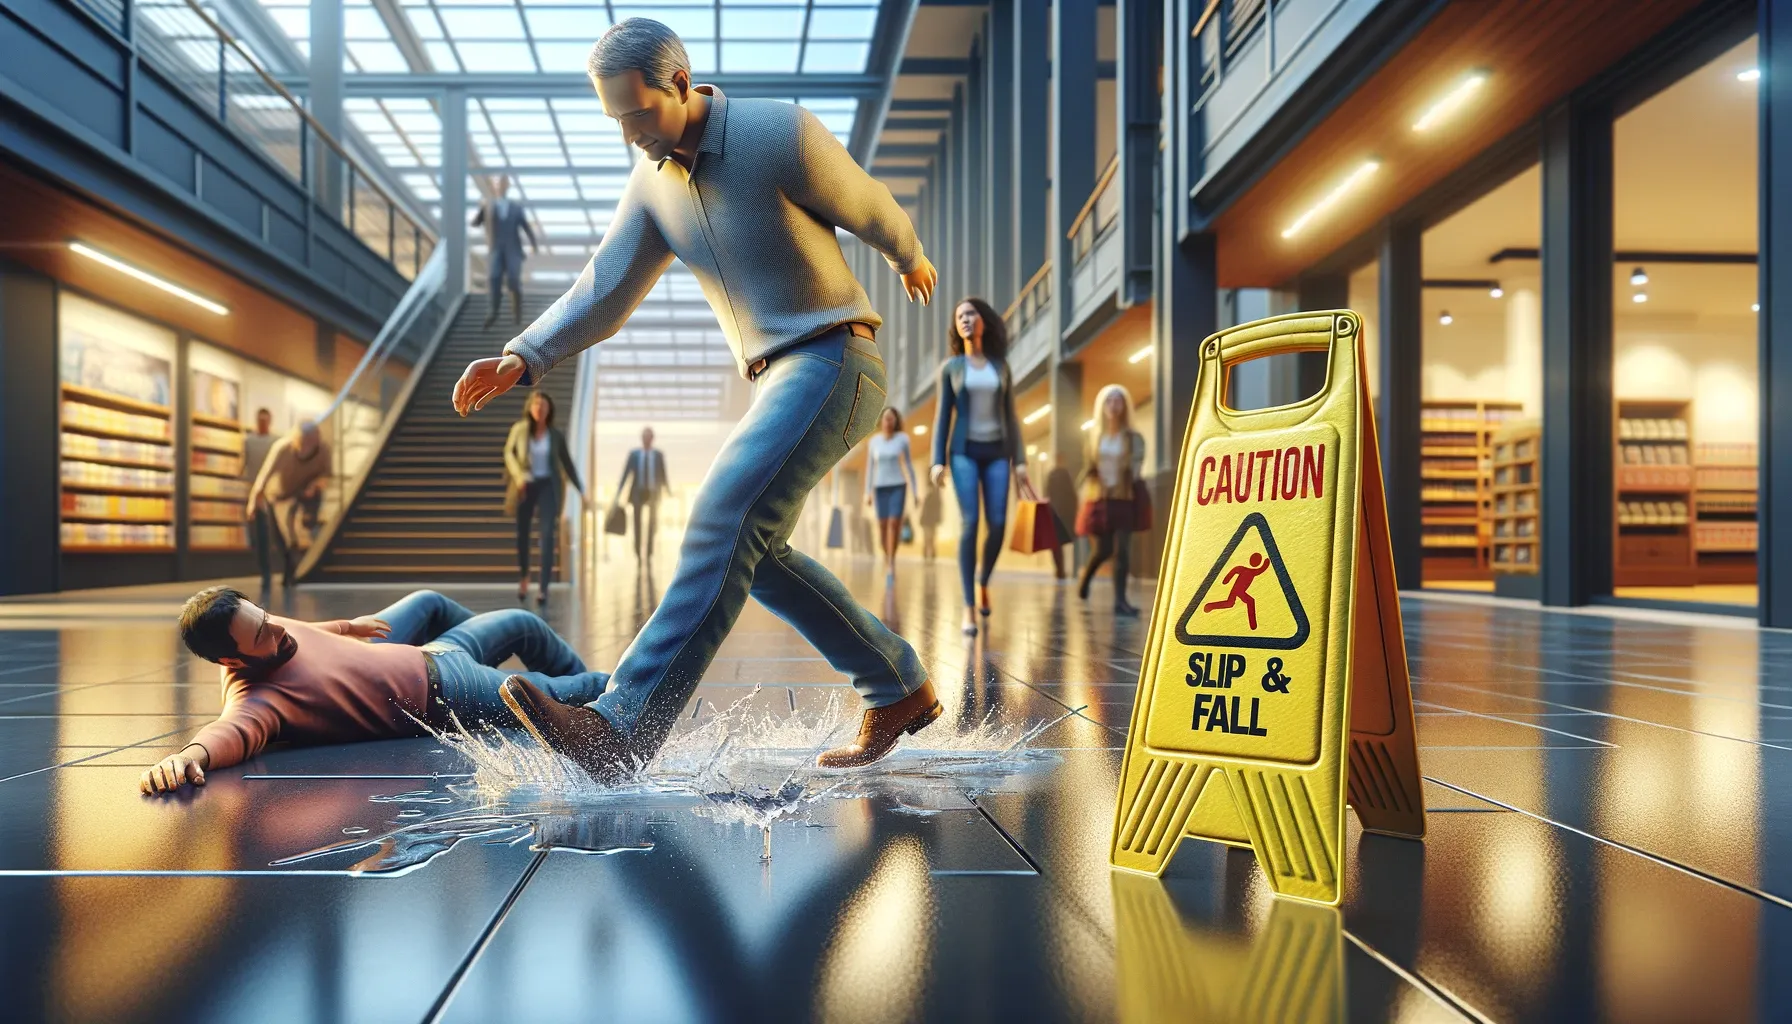 Compensation for Slip and Fall can I Receive in the UK